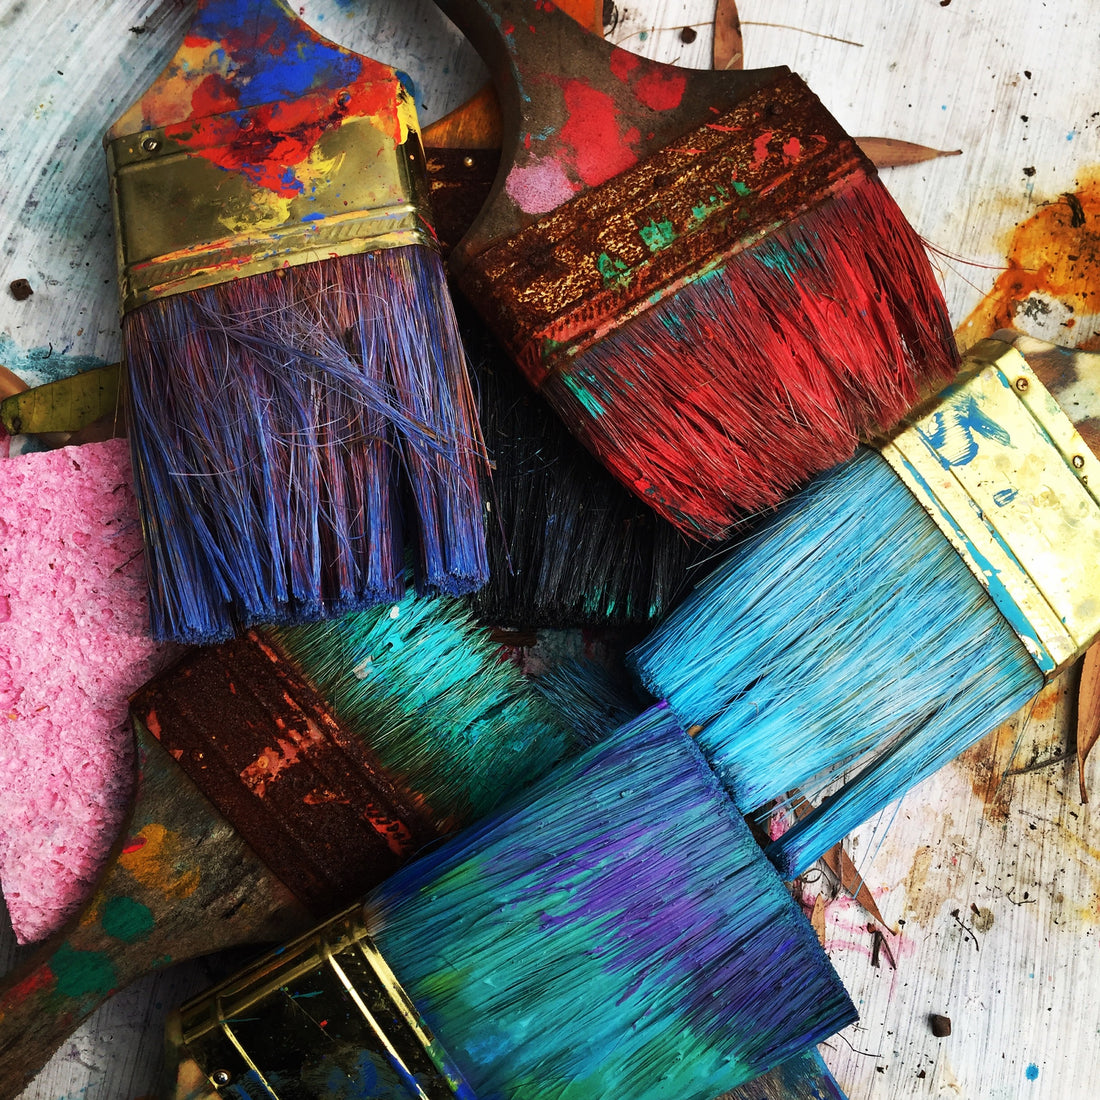 How to Choose the Best Paintbrush: Tips and Tricks